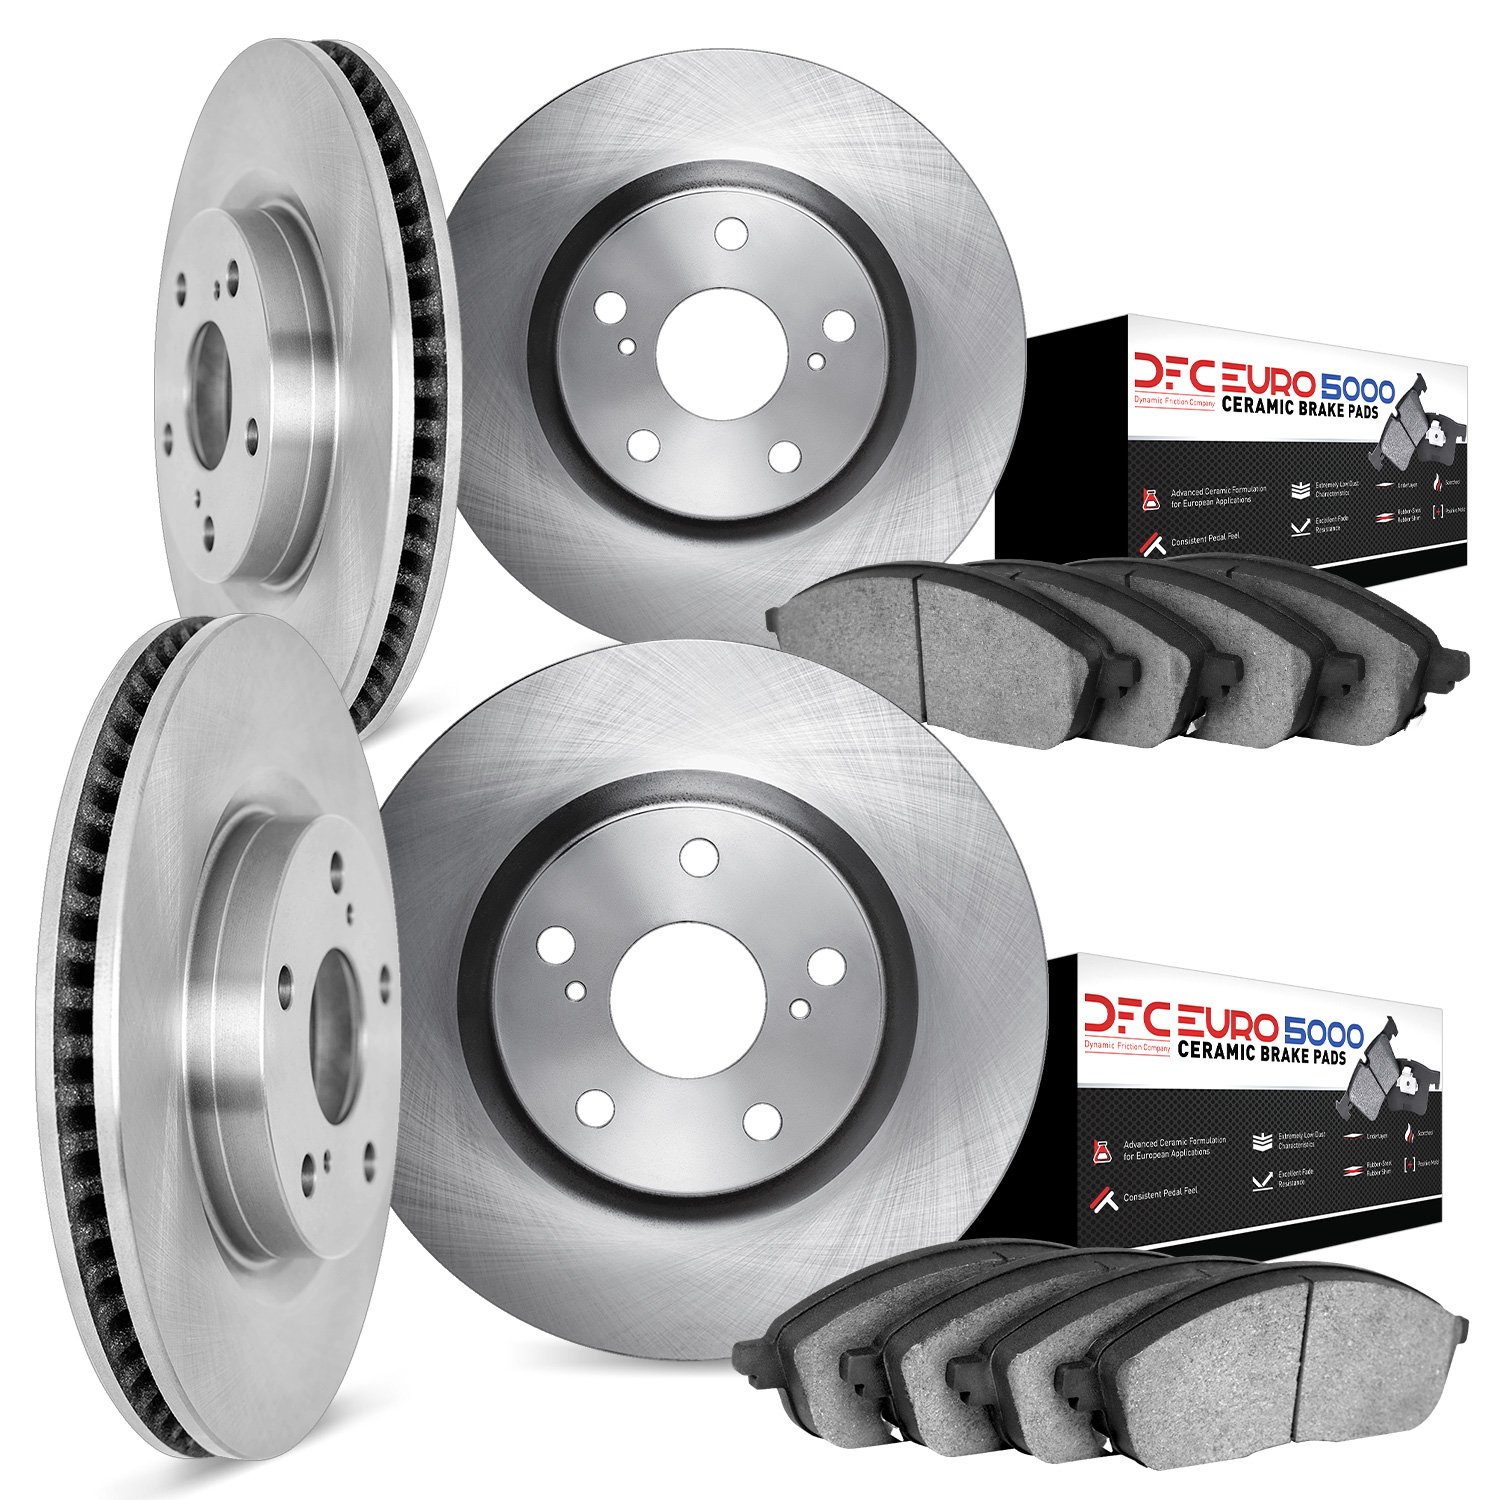 6604-11967 Brake Rotors w/5000 Euro Ceramic Brake Pads, 2011-2014 Ford/Lincoln/Mercury/Mazda, Position: Front and Rear